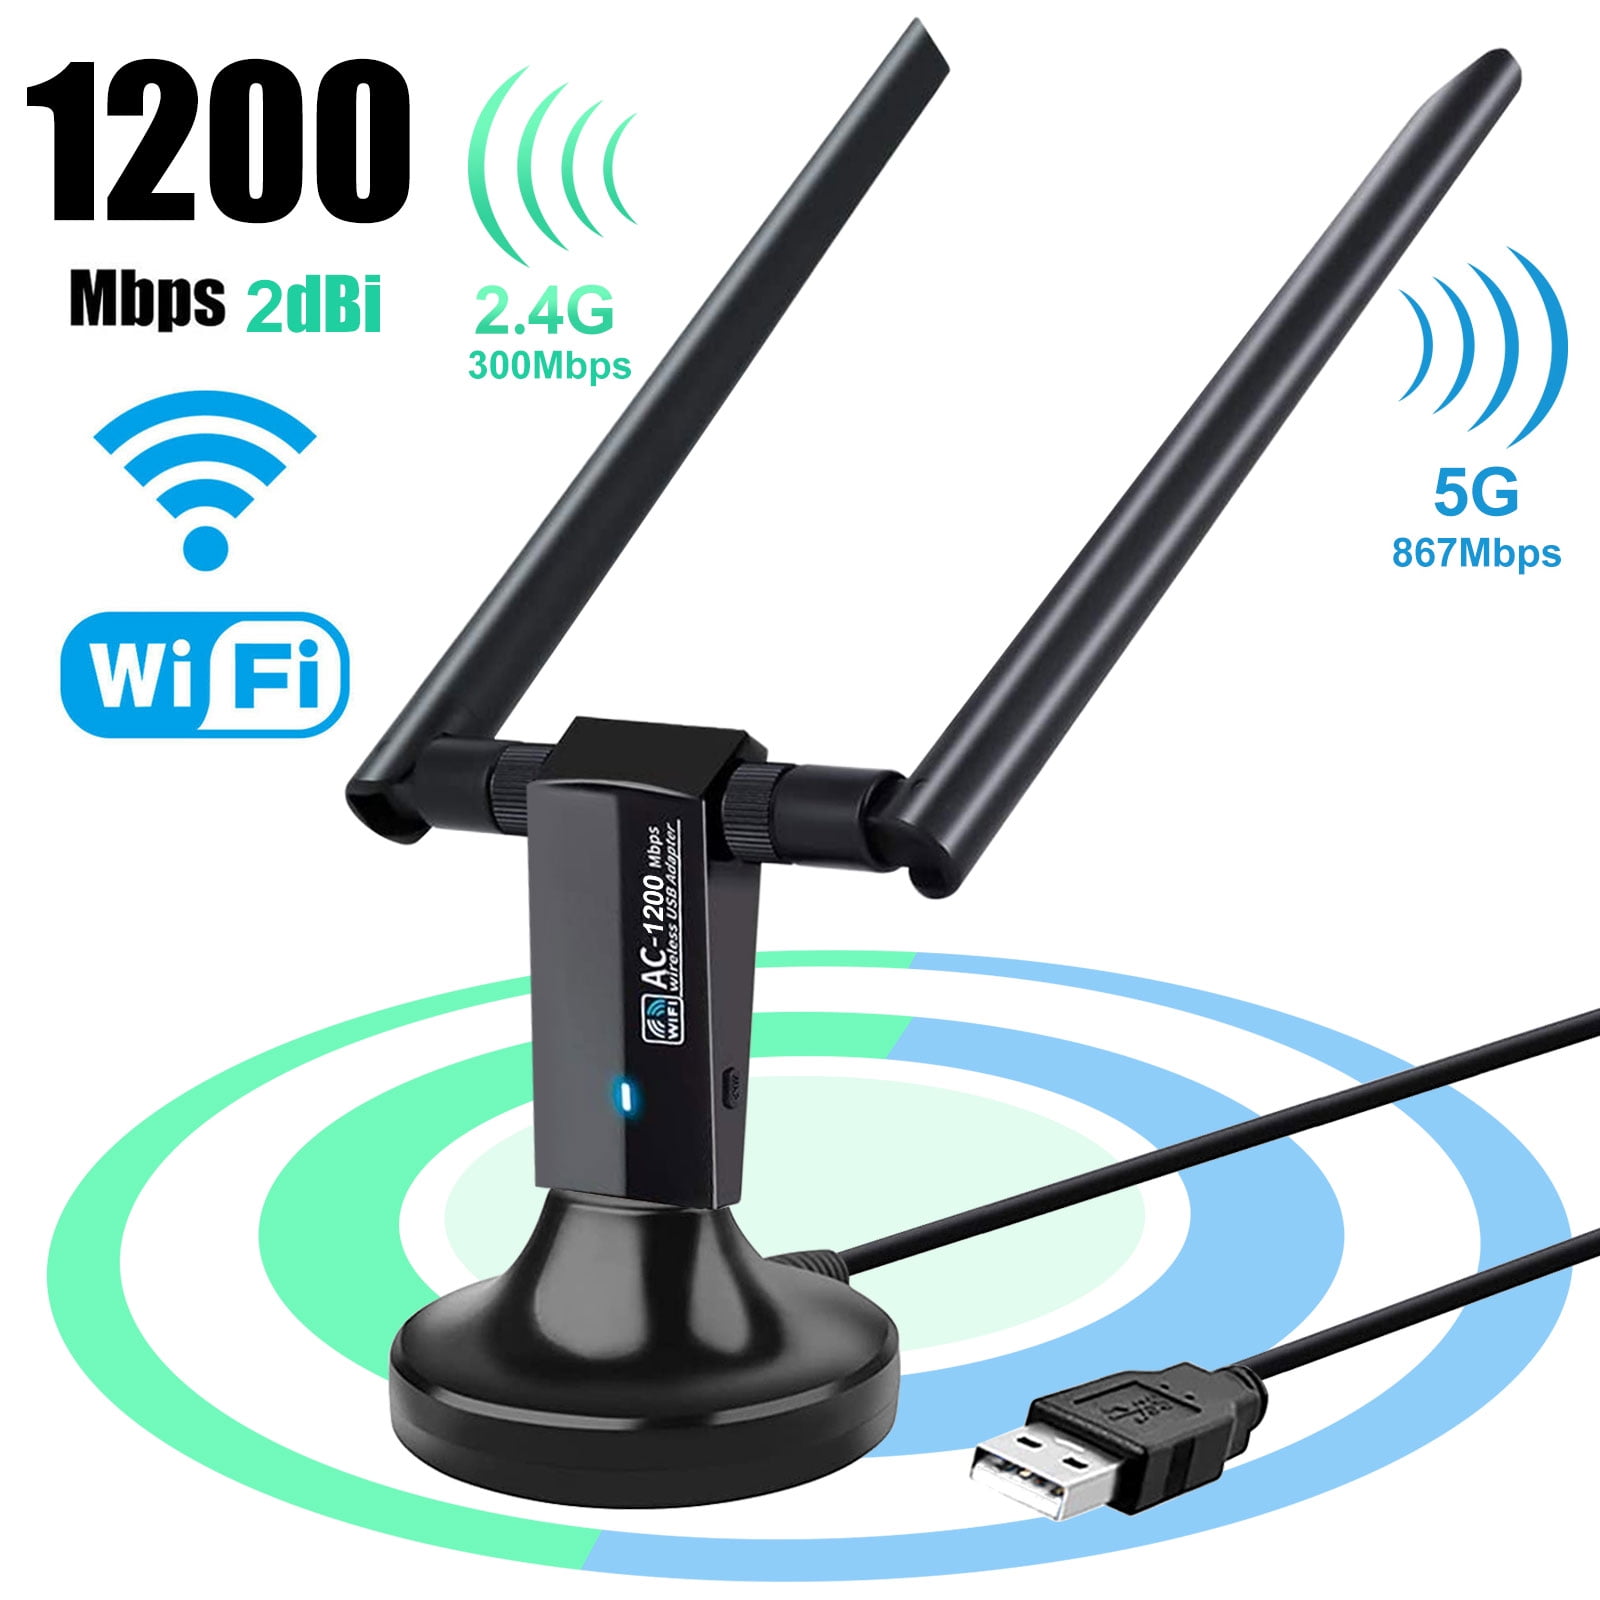 wasteland Malignant blackboard 1200Mbps USB WiFi Adapter for Desktop or PC, TSV Dual Band 2.4G/ 5G AC  Wireless Network Card Dongle with 5dBi High Gain Antenna for Desktop Laptop  PC Support Windows 11/10/8/7/XP/Vista, Mac OS -